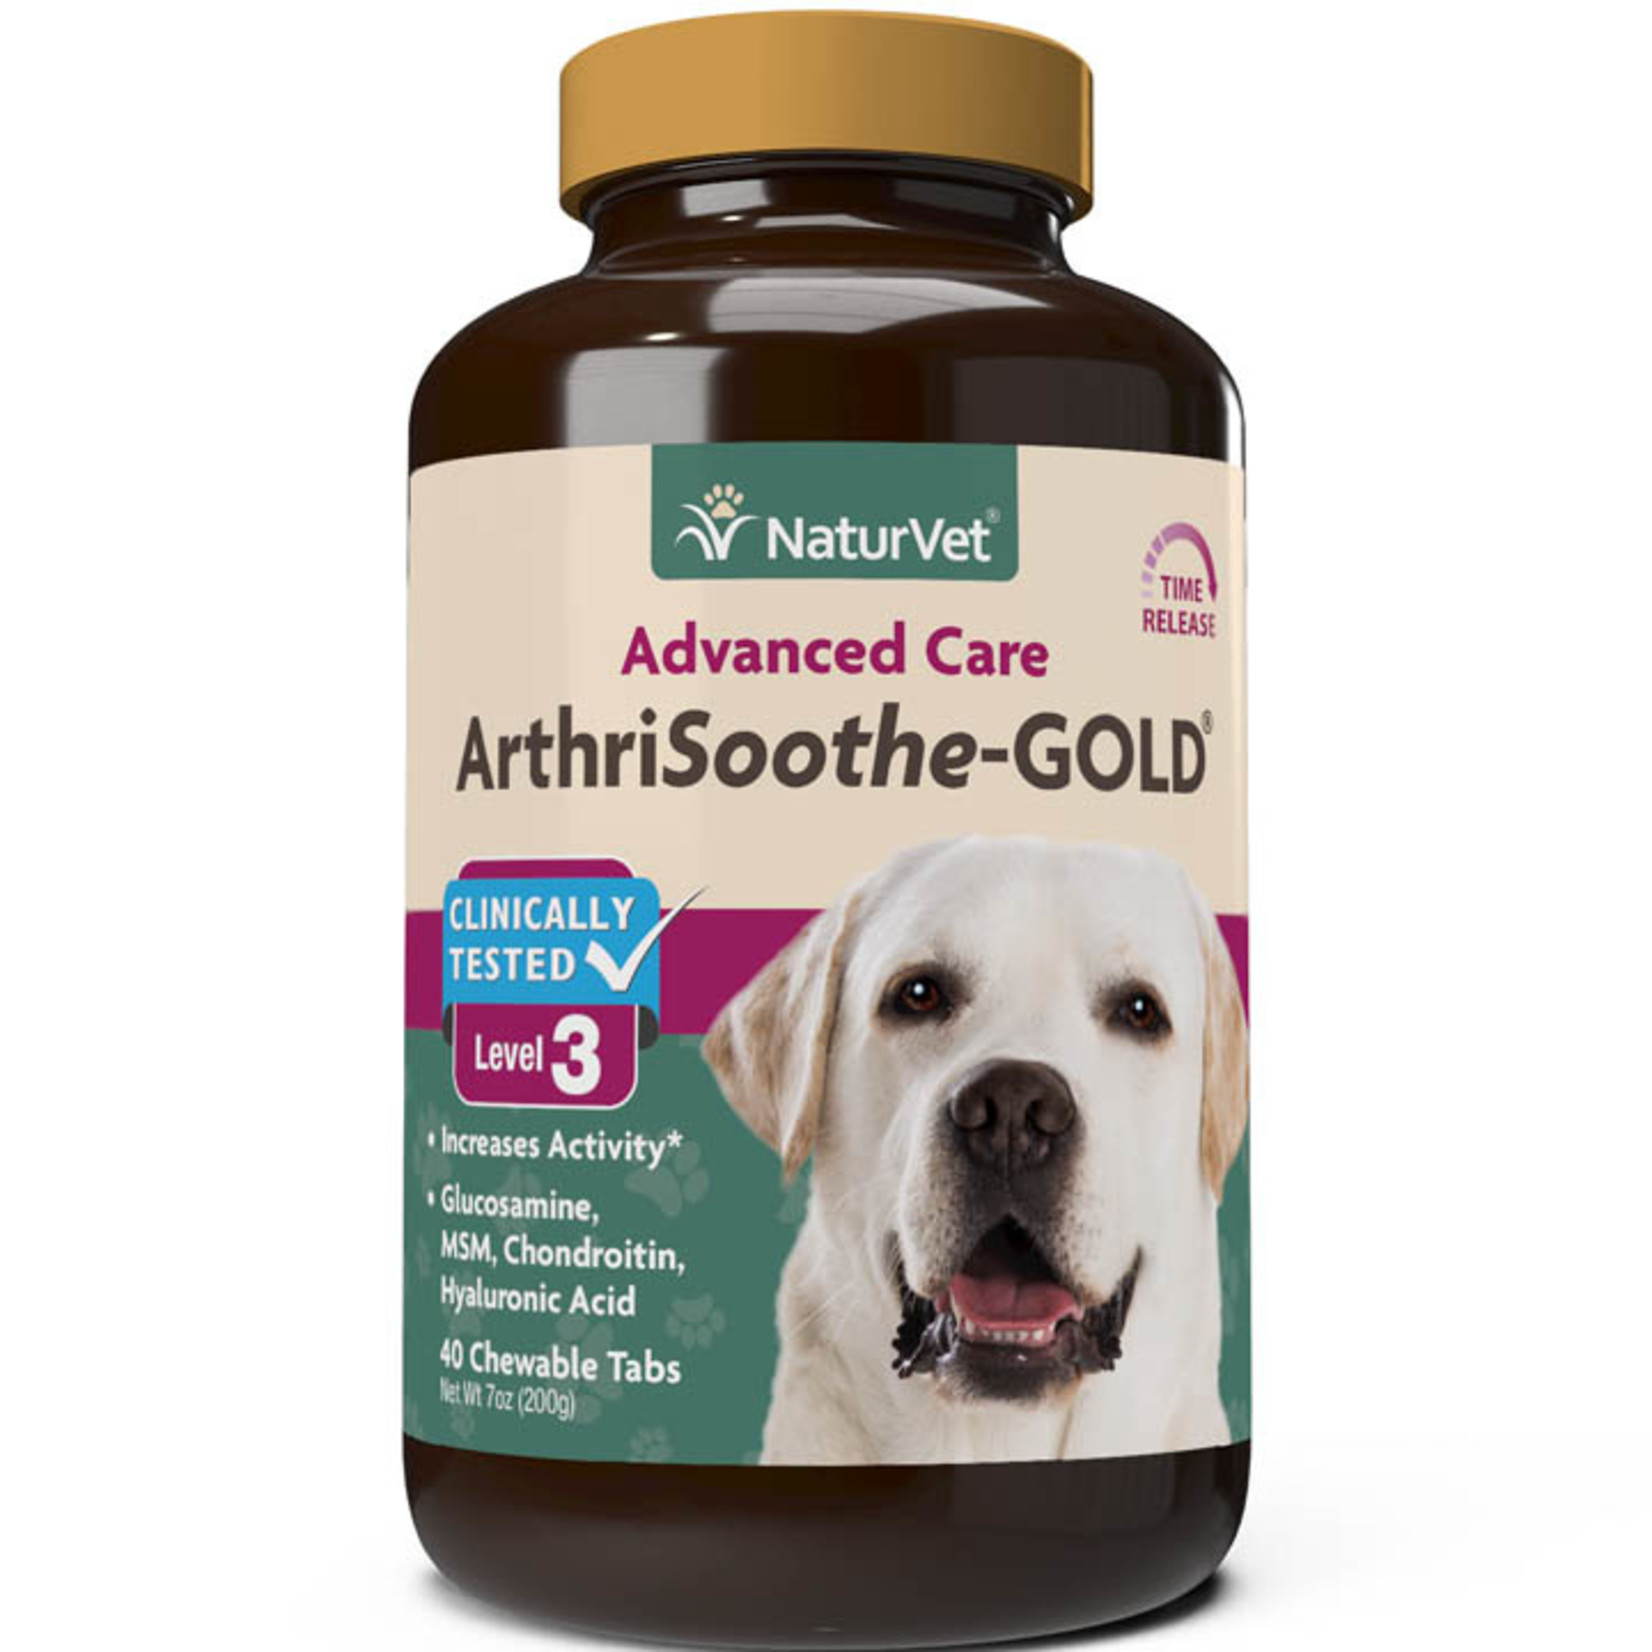 naturVet NaturVet ArthriSoothe Gold Advanced Care Level 3 Joint Health Chewable Tablets for Dogs and Cats - 40ct, 90ct